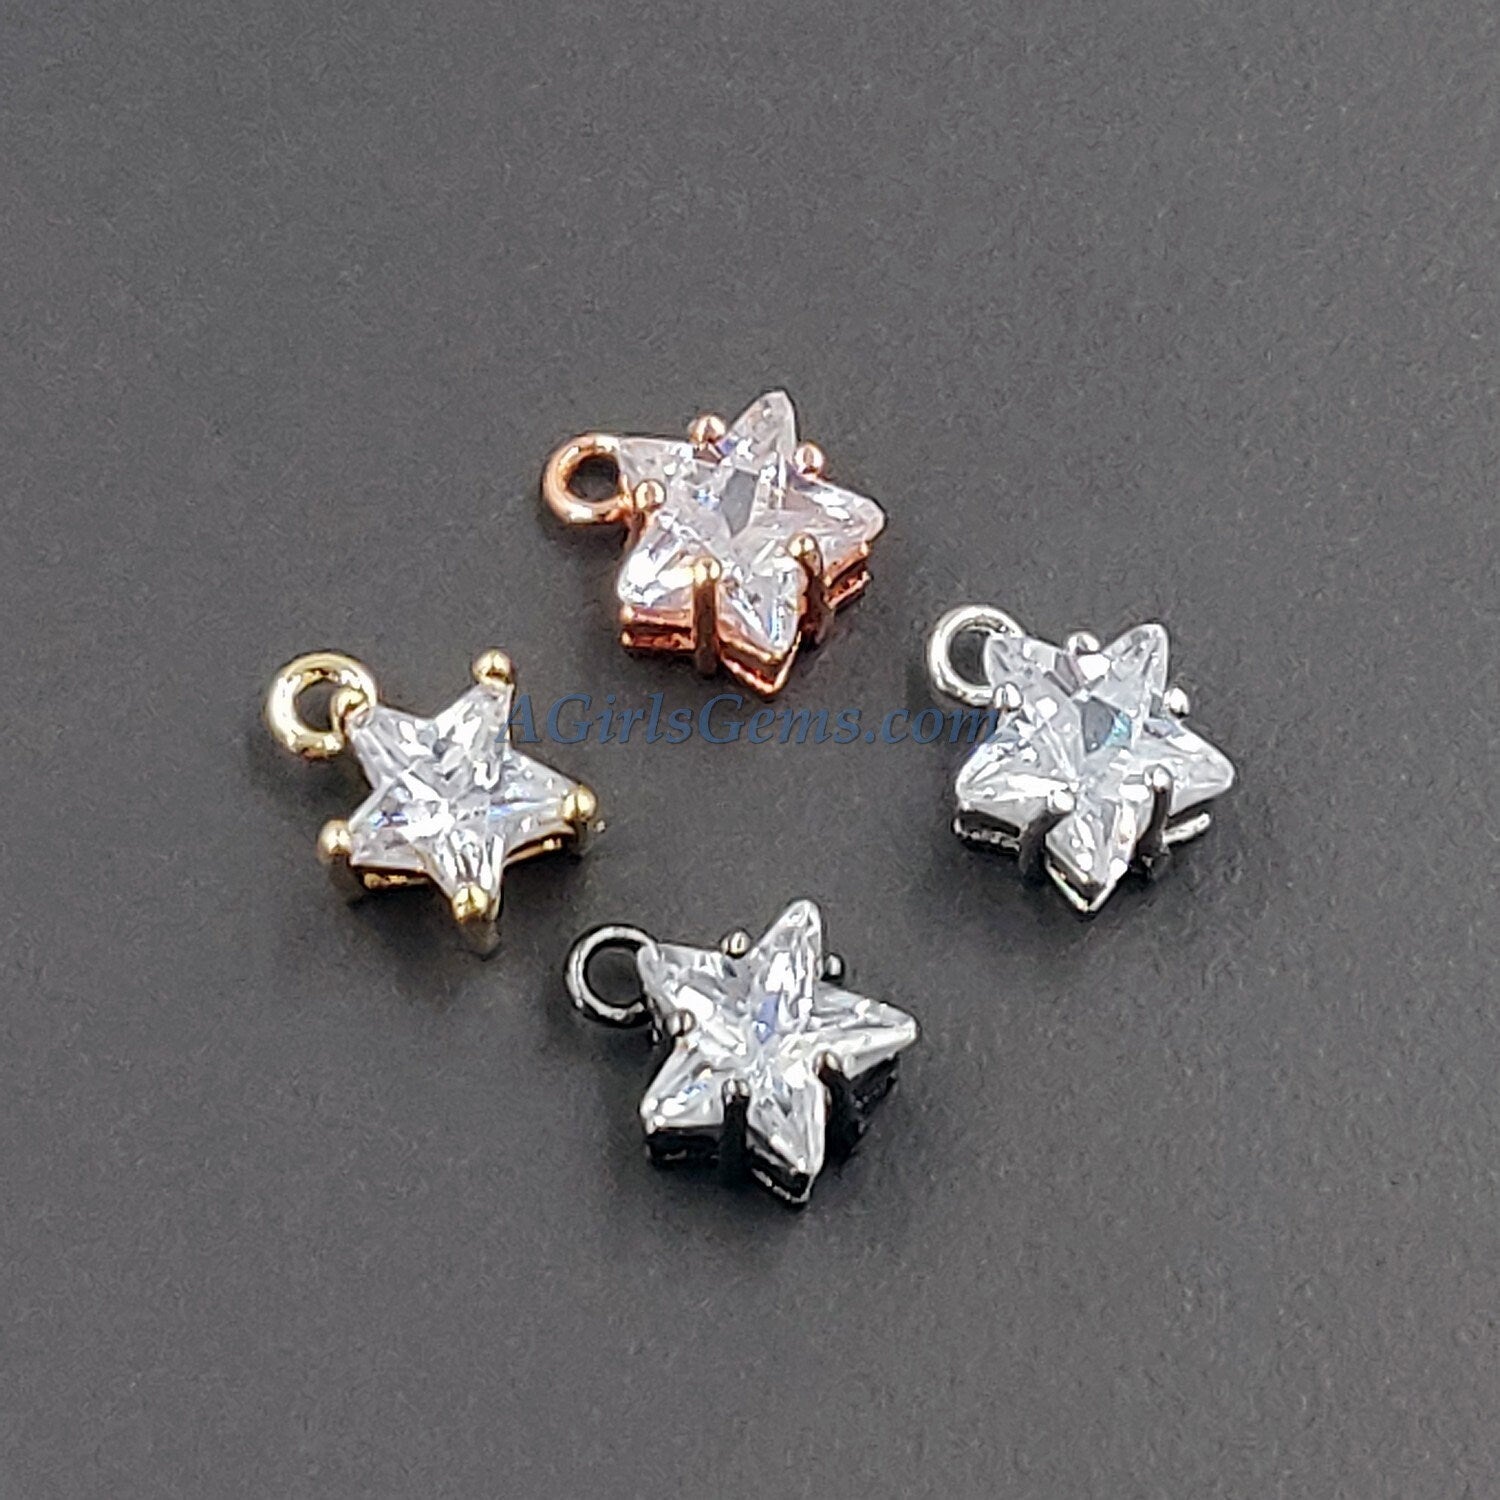 Silver Star Charms, CZ Solitaire Starburst Dangles, 8 x 10 mm Cubic Zircons